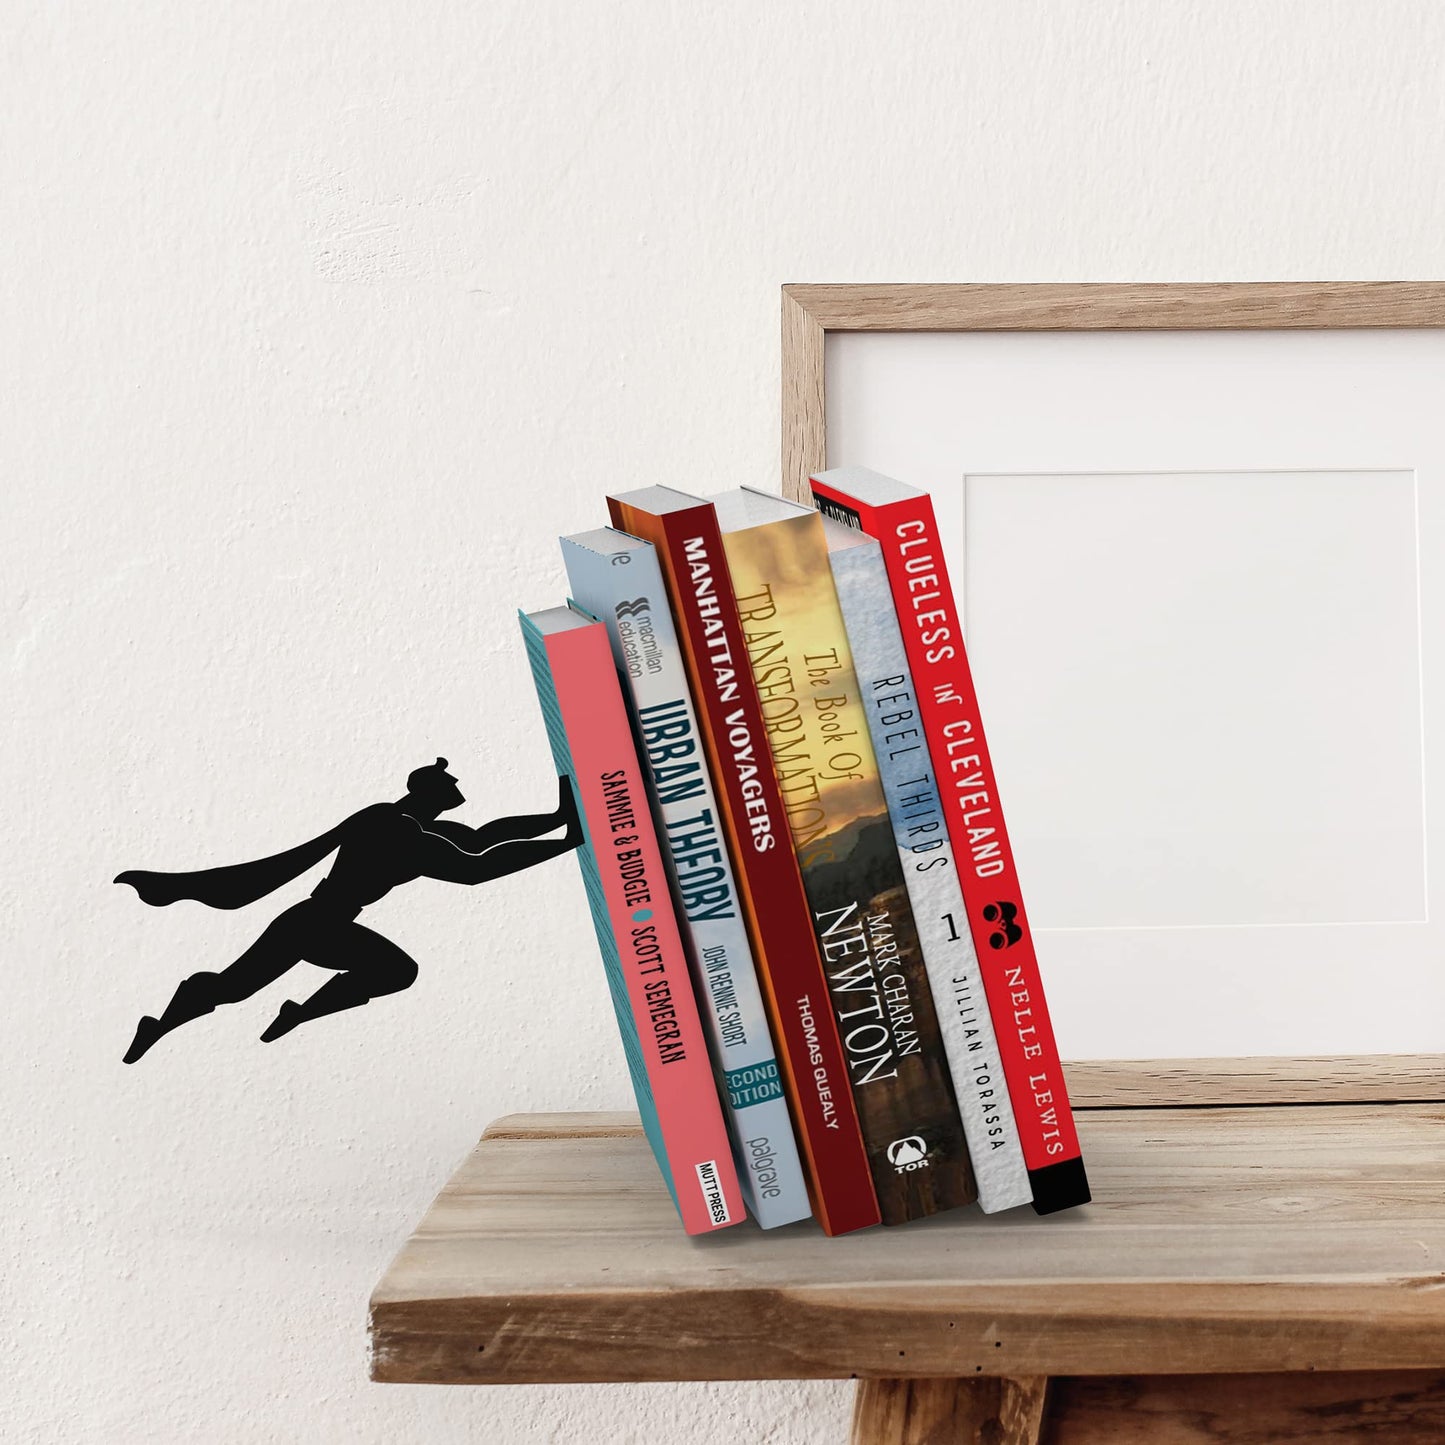 Artori Design Book & Hero | Black Metal Superhero Book Ends | Unique Bookends | Gifts for Geeks | Gifts for Book Lovers | Cool Book Stopper Gift for Dad